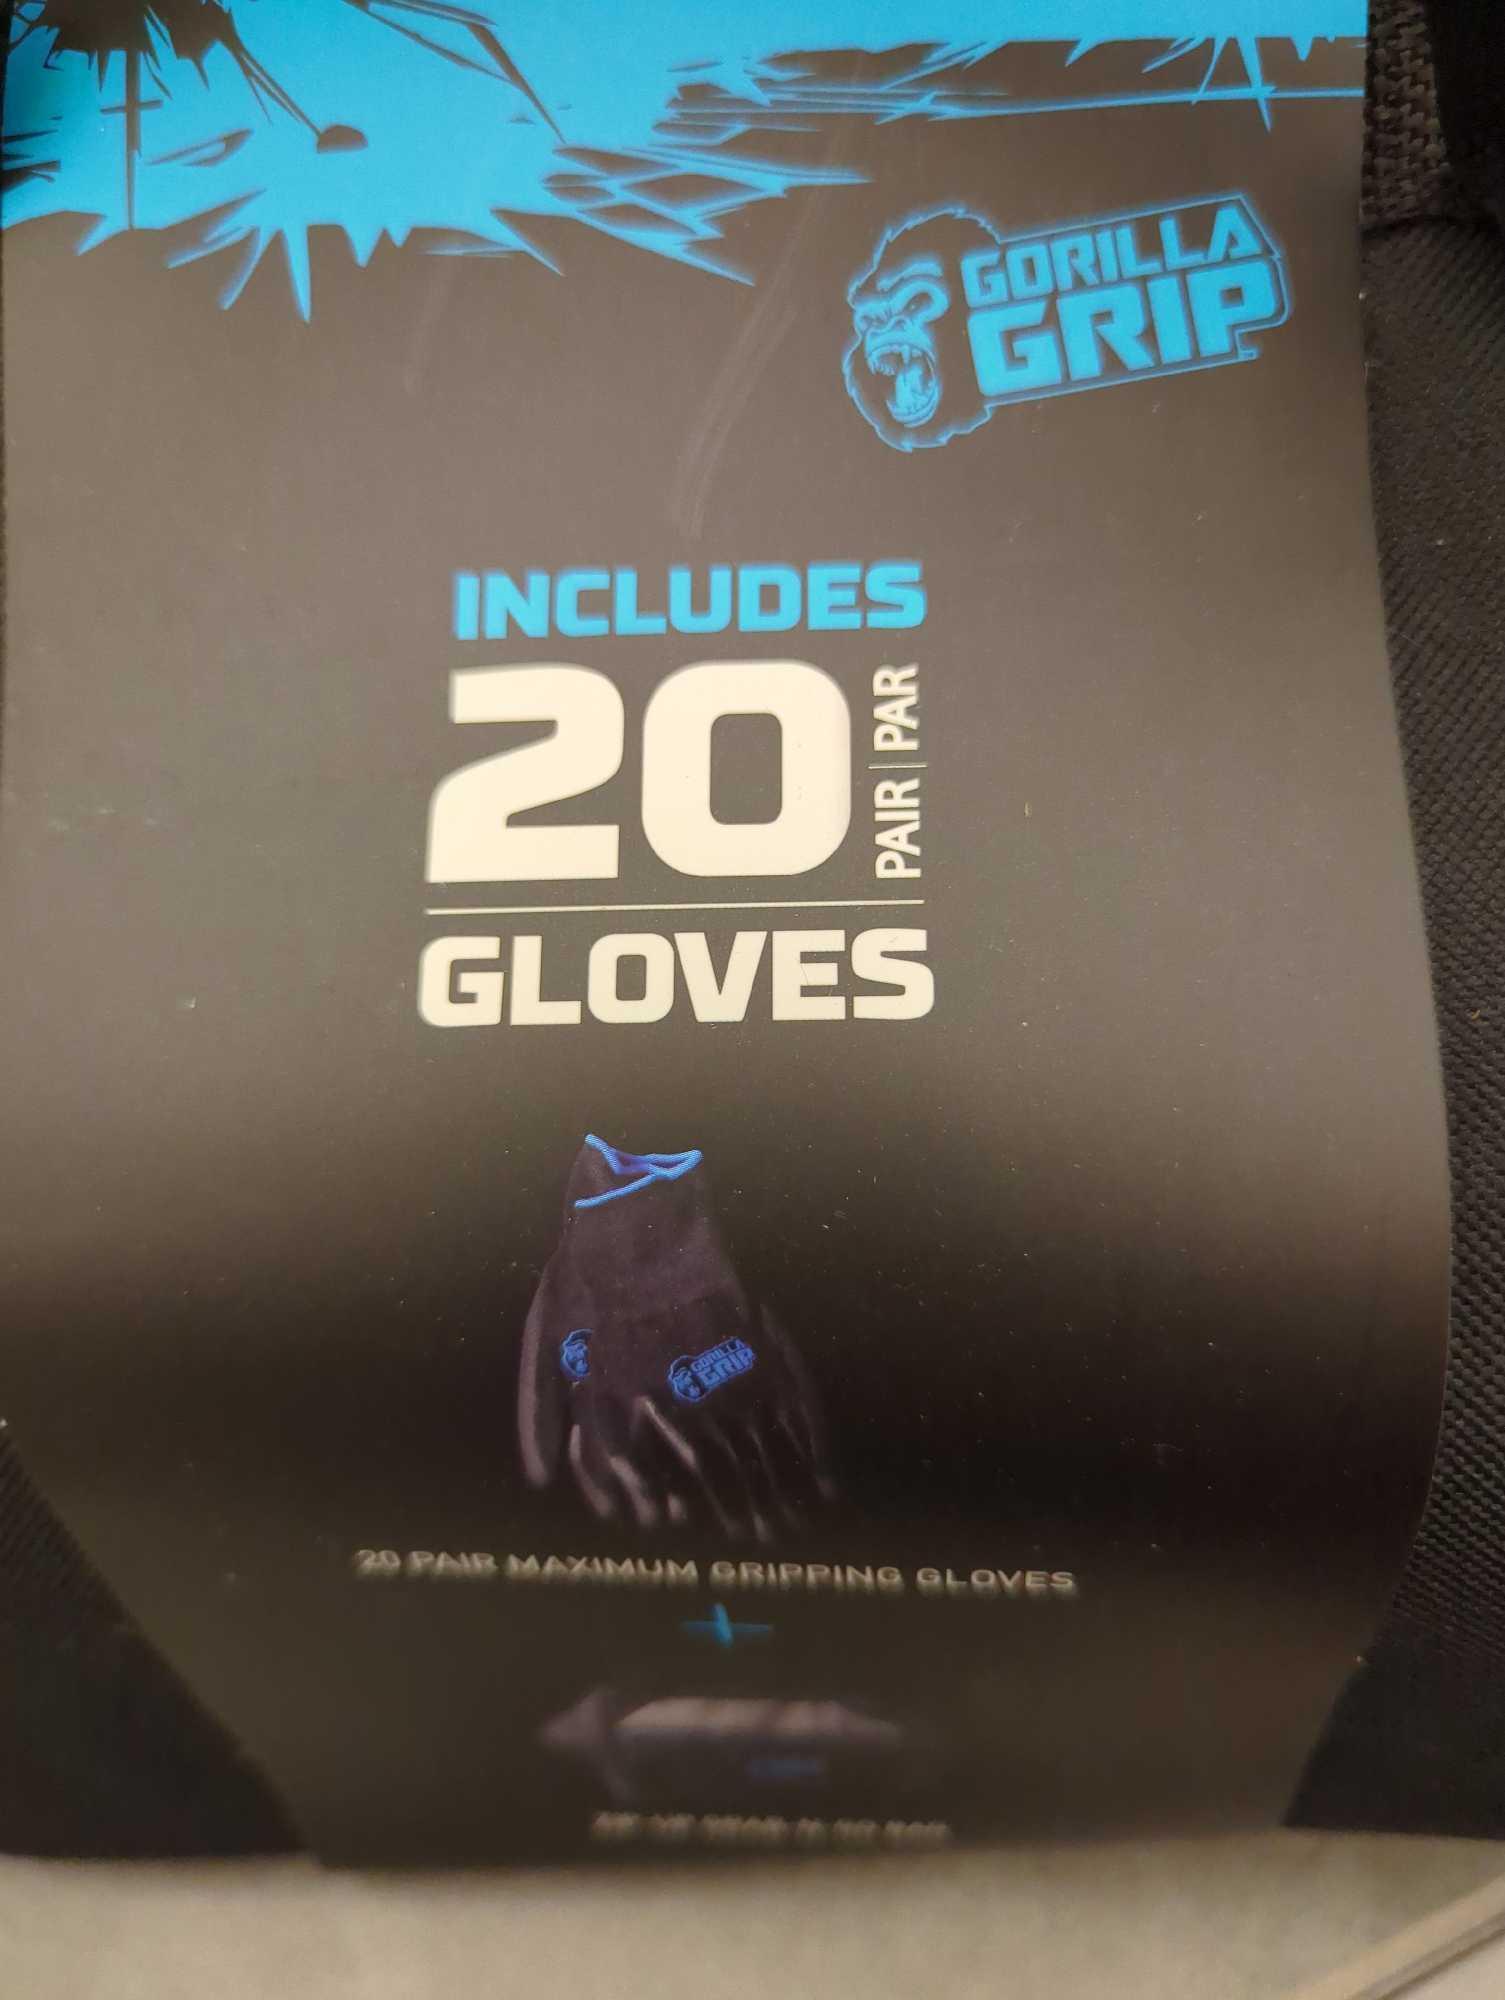 Gorilla Grip 20 Gloves Mechanic Maximum Gripping Large Grab Go Bag, Appears to be New in Factory